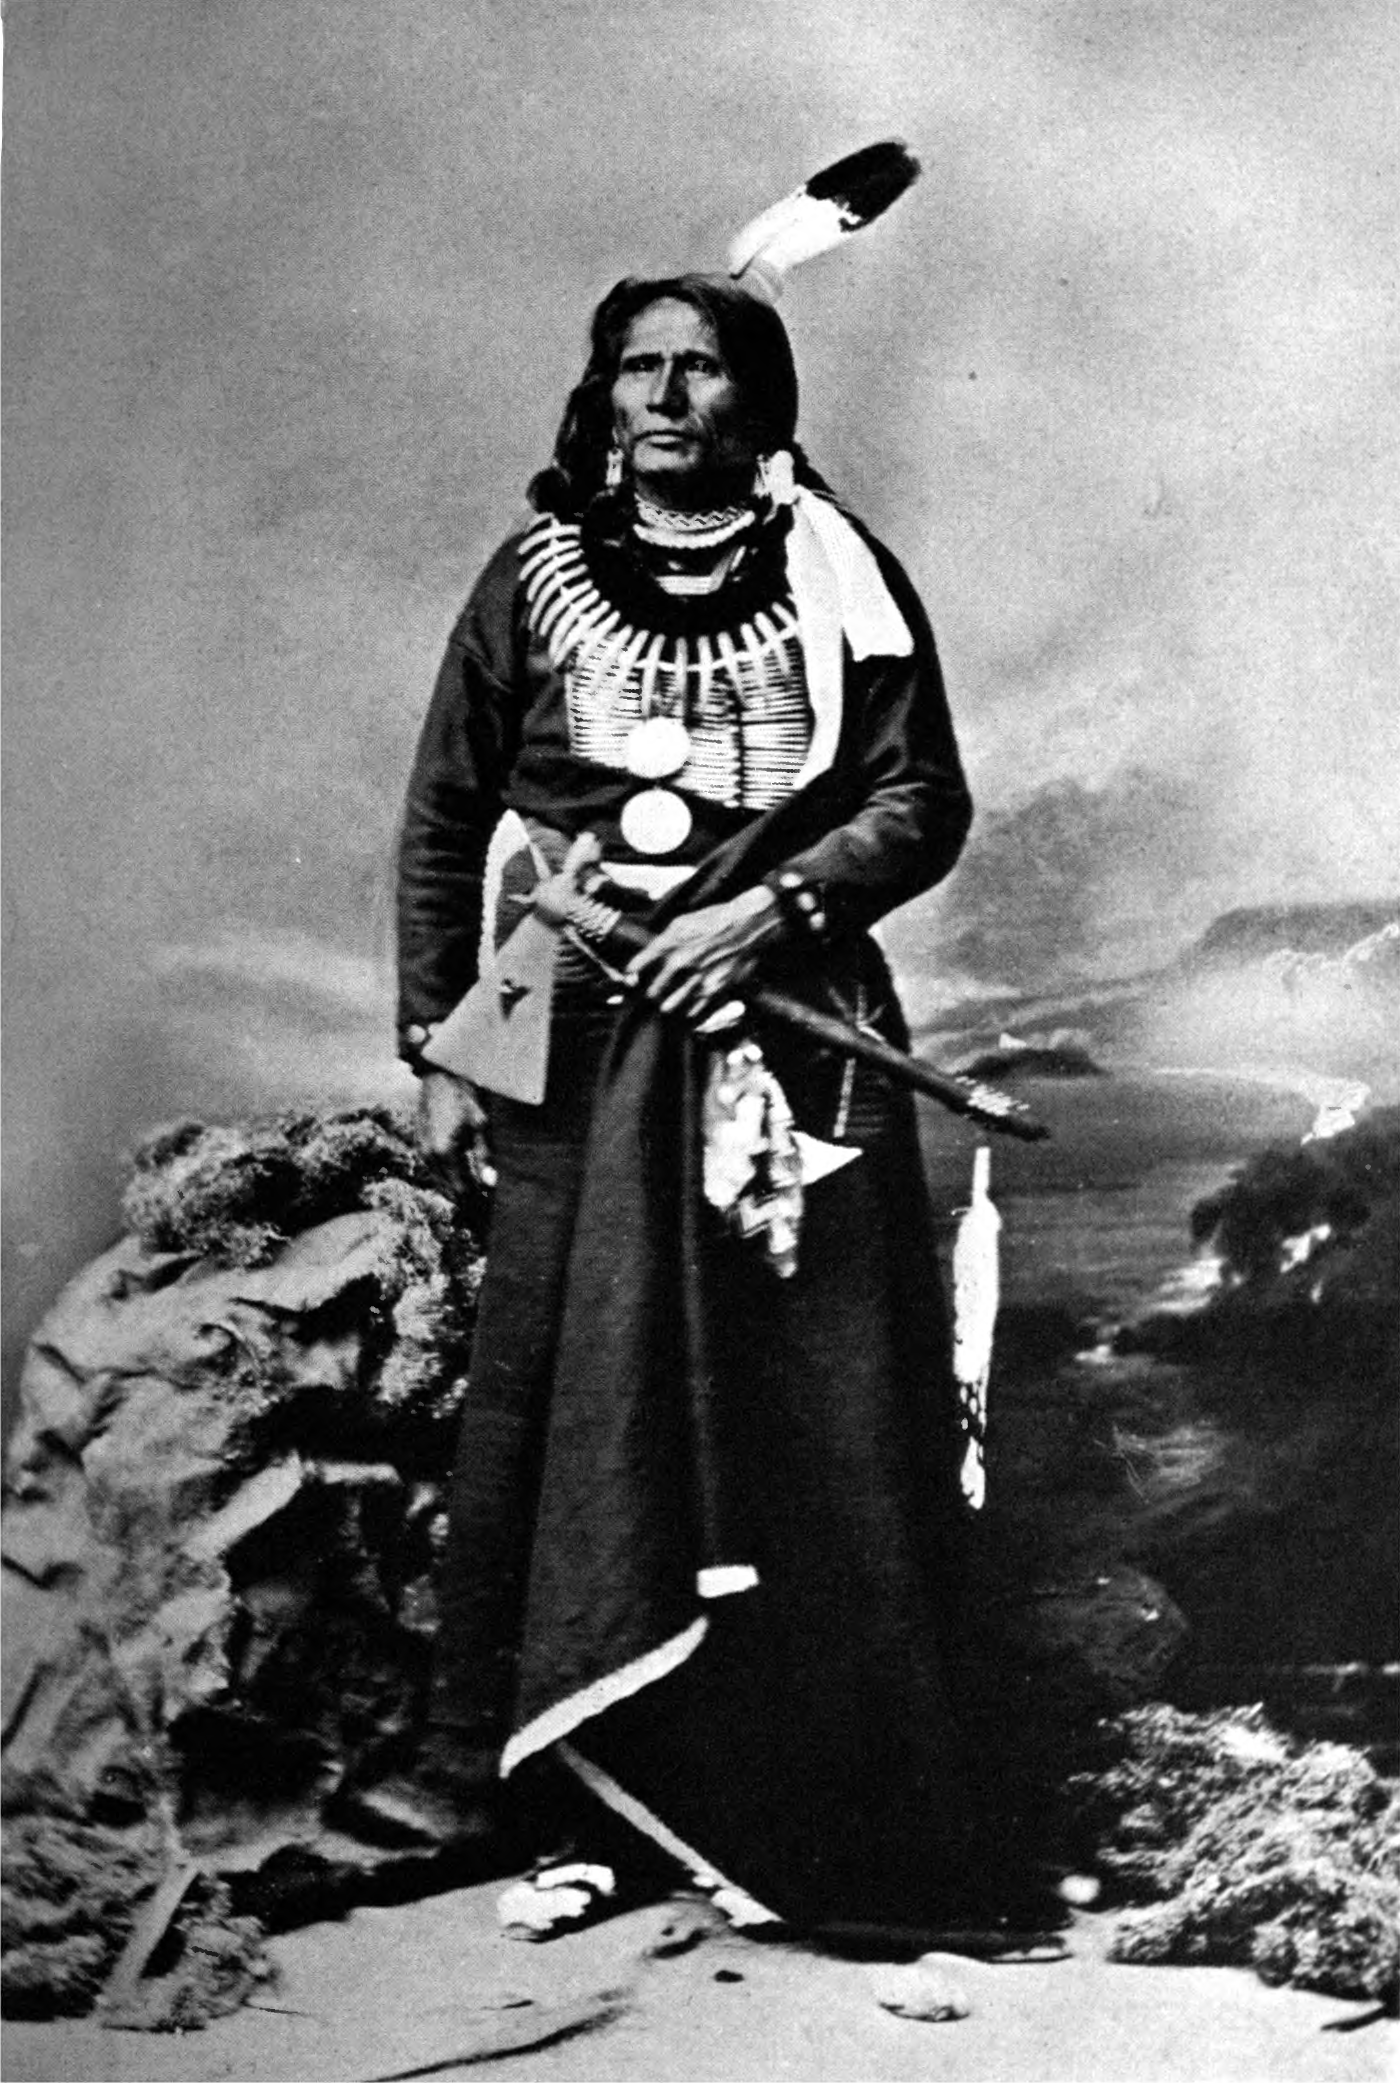 Chief Standing Bear photographed in 1877, apparently holding the pipe-tomahawk he would give to one of his lawyers two years later. The object was acquired by Harvard University in 1982, and on June 3, the institution and its relevant museum returned it to the Ponca tribe. Courtesy of Wikimedia Commons, which states that the image, extracted from the 1906 book The Indian Dispossessed, is in the public domain in the United States because it was published prior to January 1, 1927, and/or the copyright was, for whatever reason, not renewed.